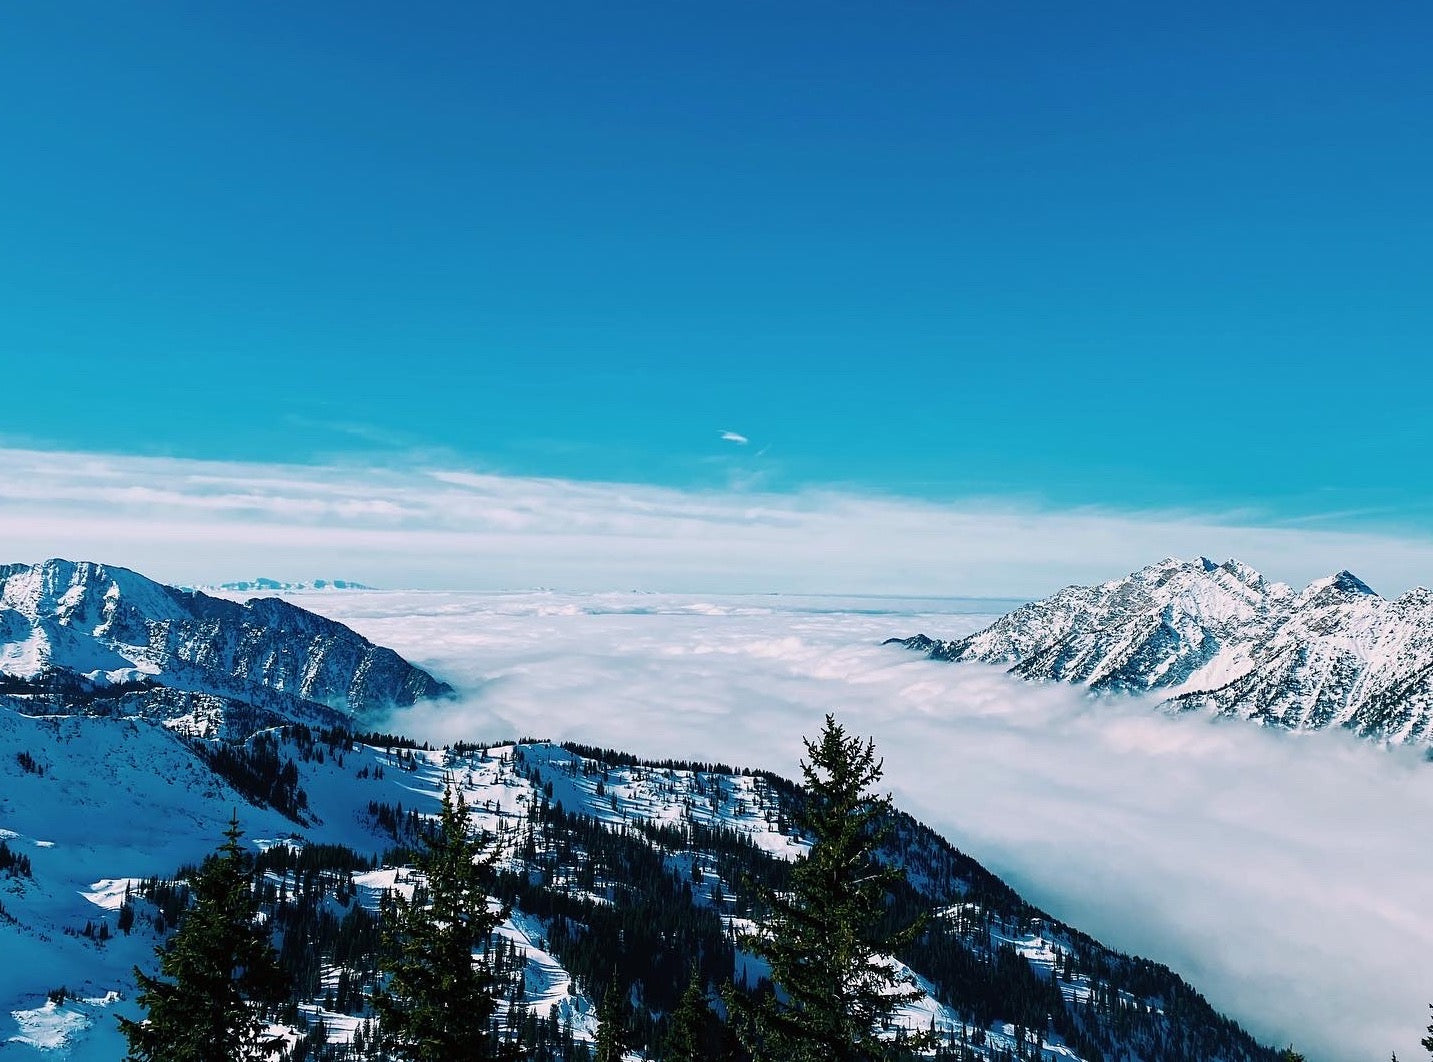 View from the top of Snowbird Mountain in Utah. The view is from above the clouds and shows alpine, snow and bright blue skies. It is a great place for apres ski as you can grab a fresh cold beer and enjoy the incredible views from the top of the mountain